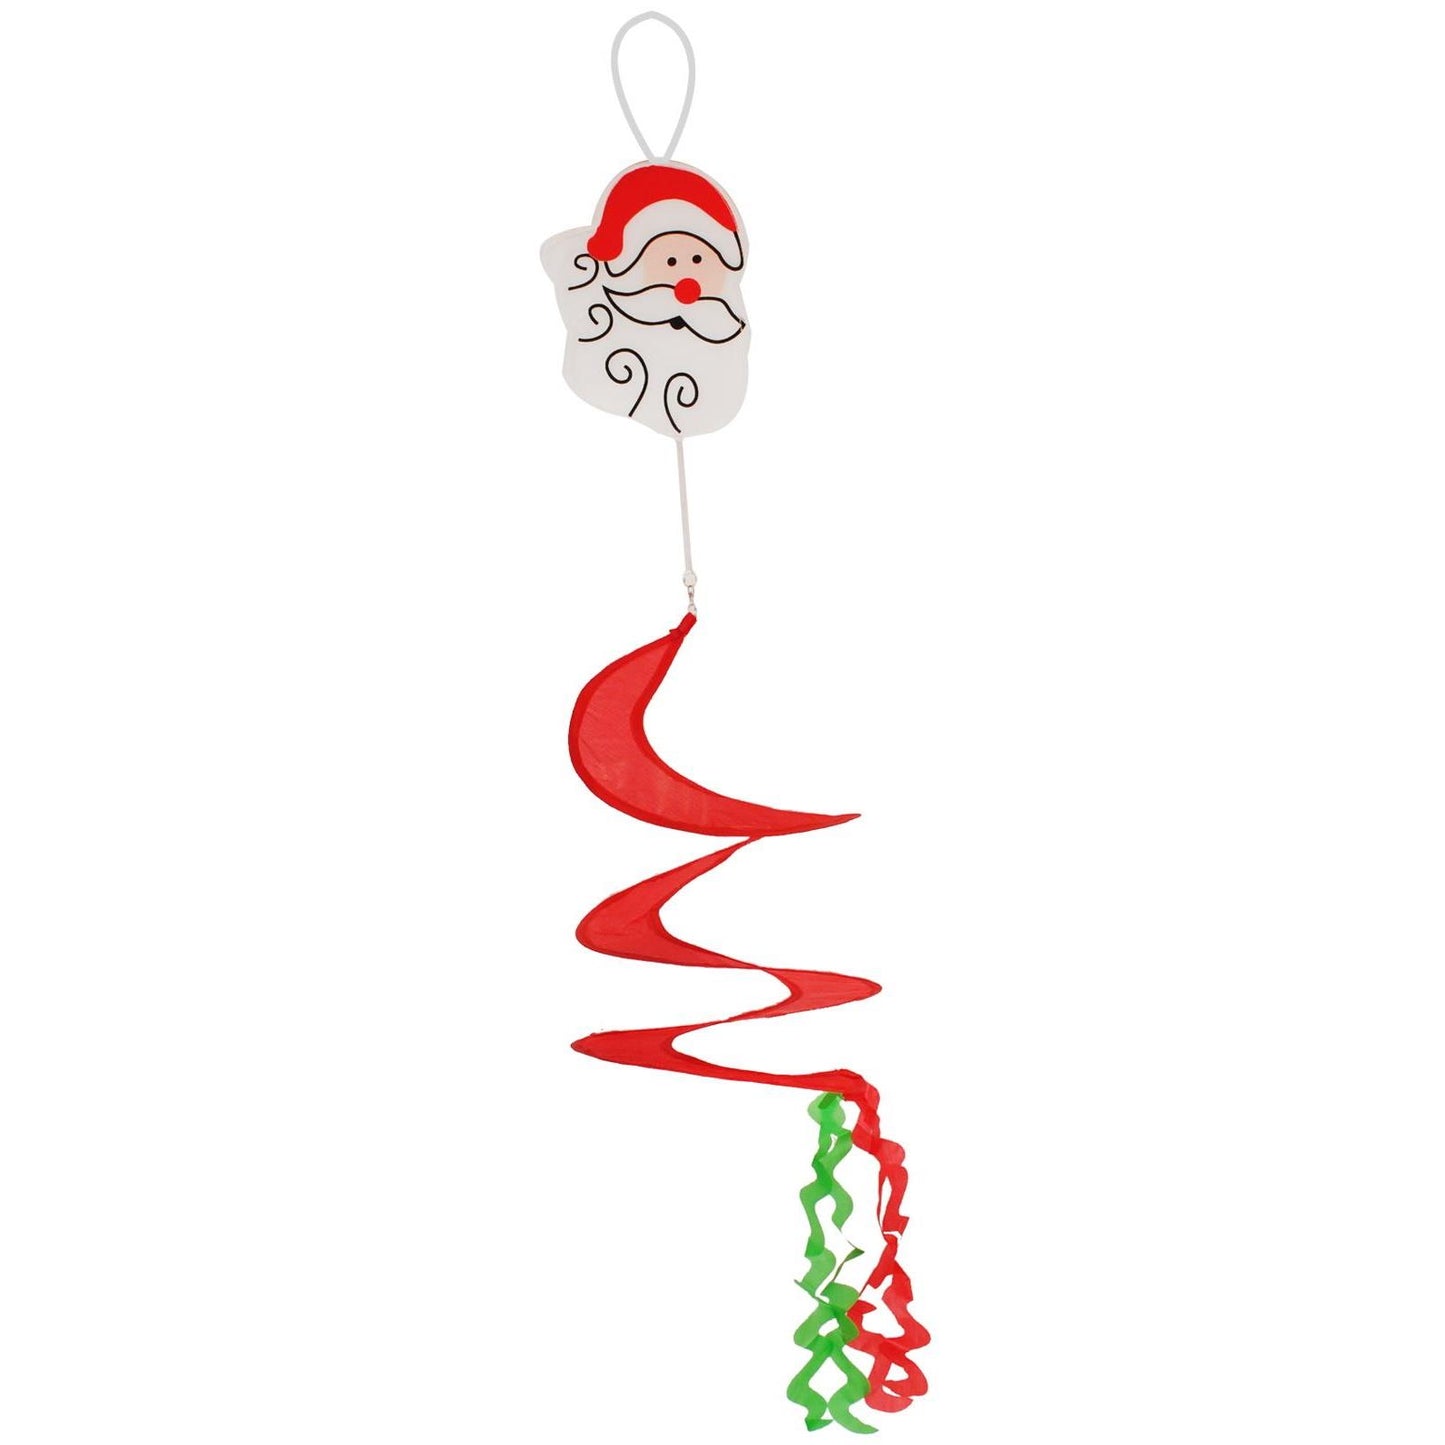 Festive Christmas Ornaments and Toys